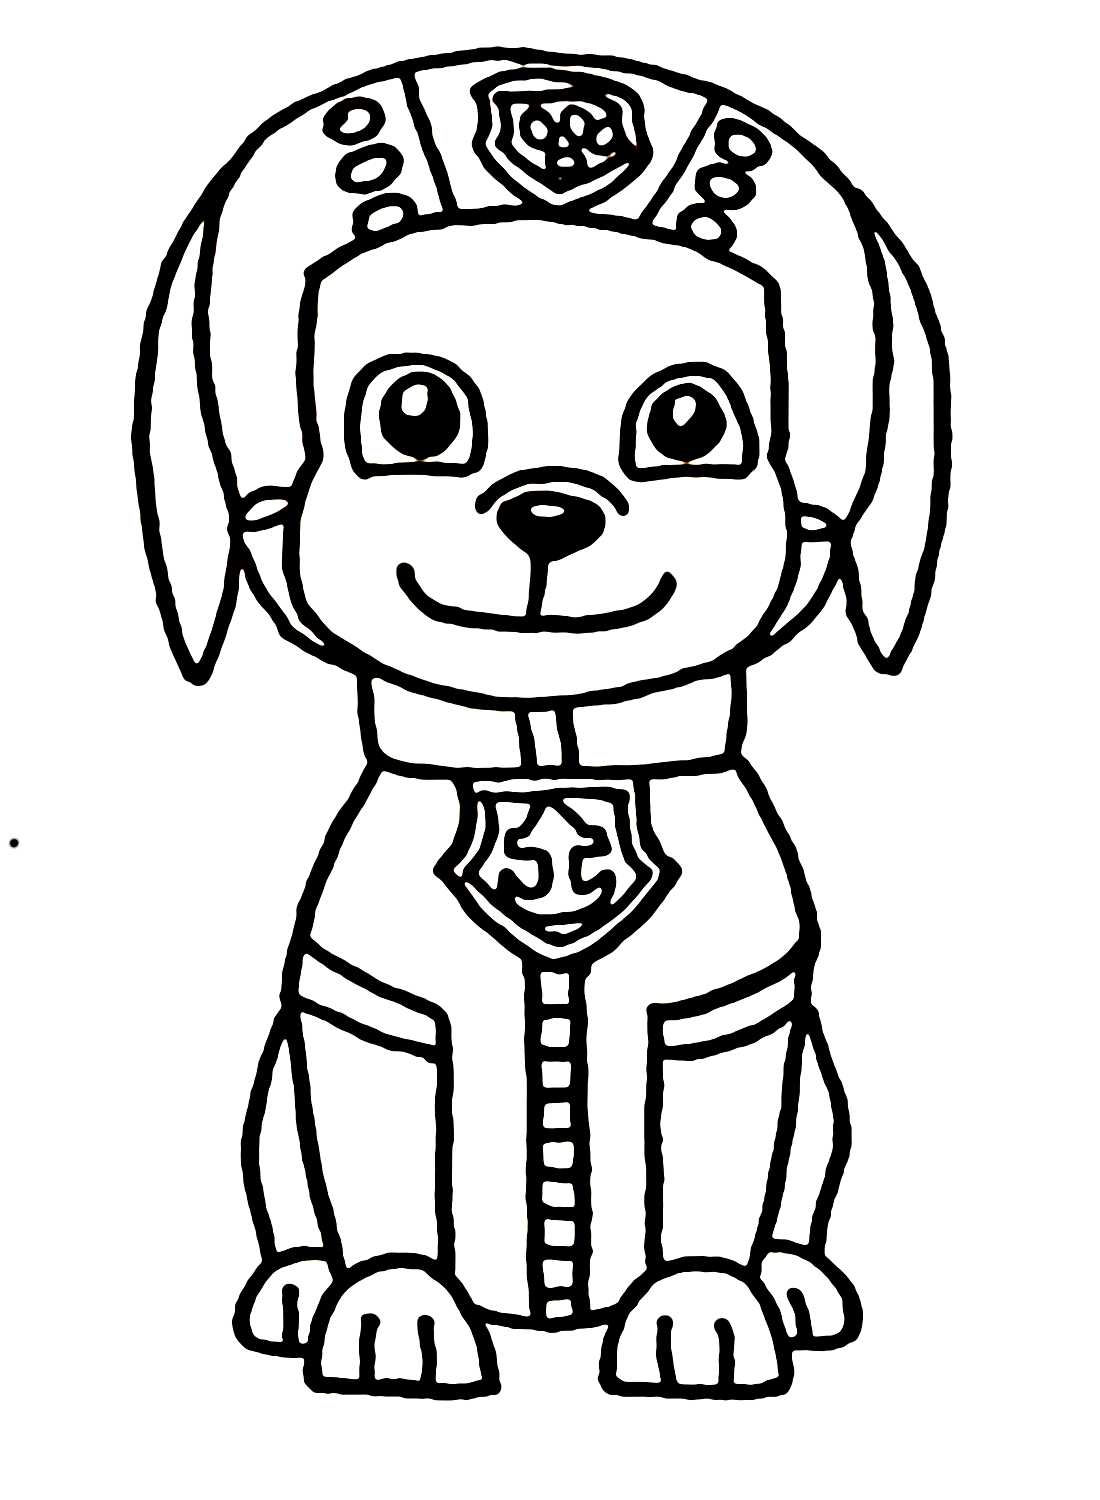 Draw Zuma from Paw Patrol Coloring Page